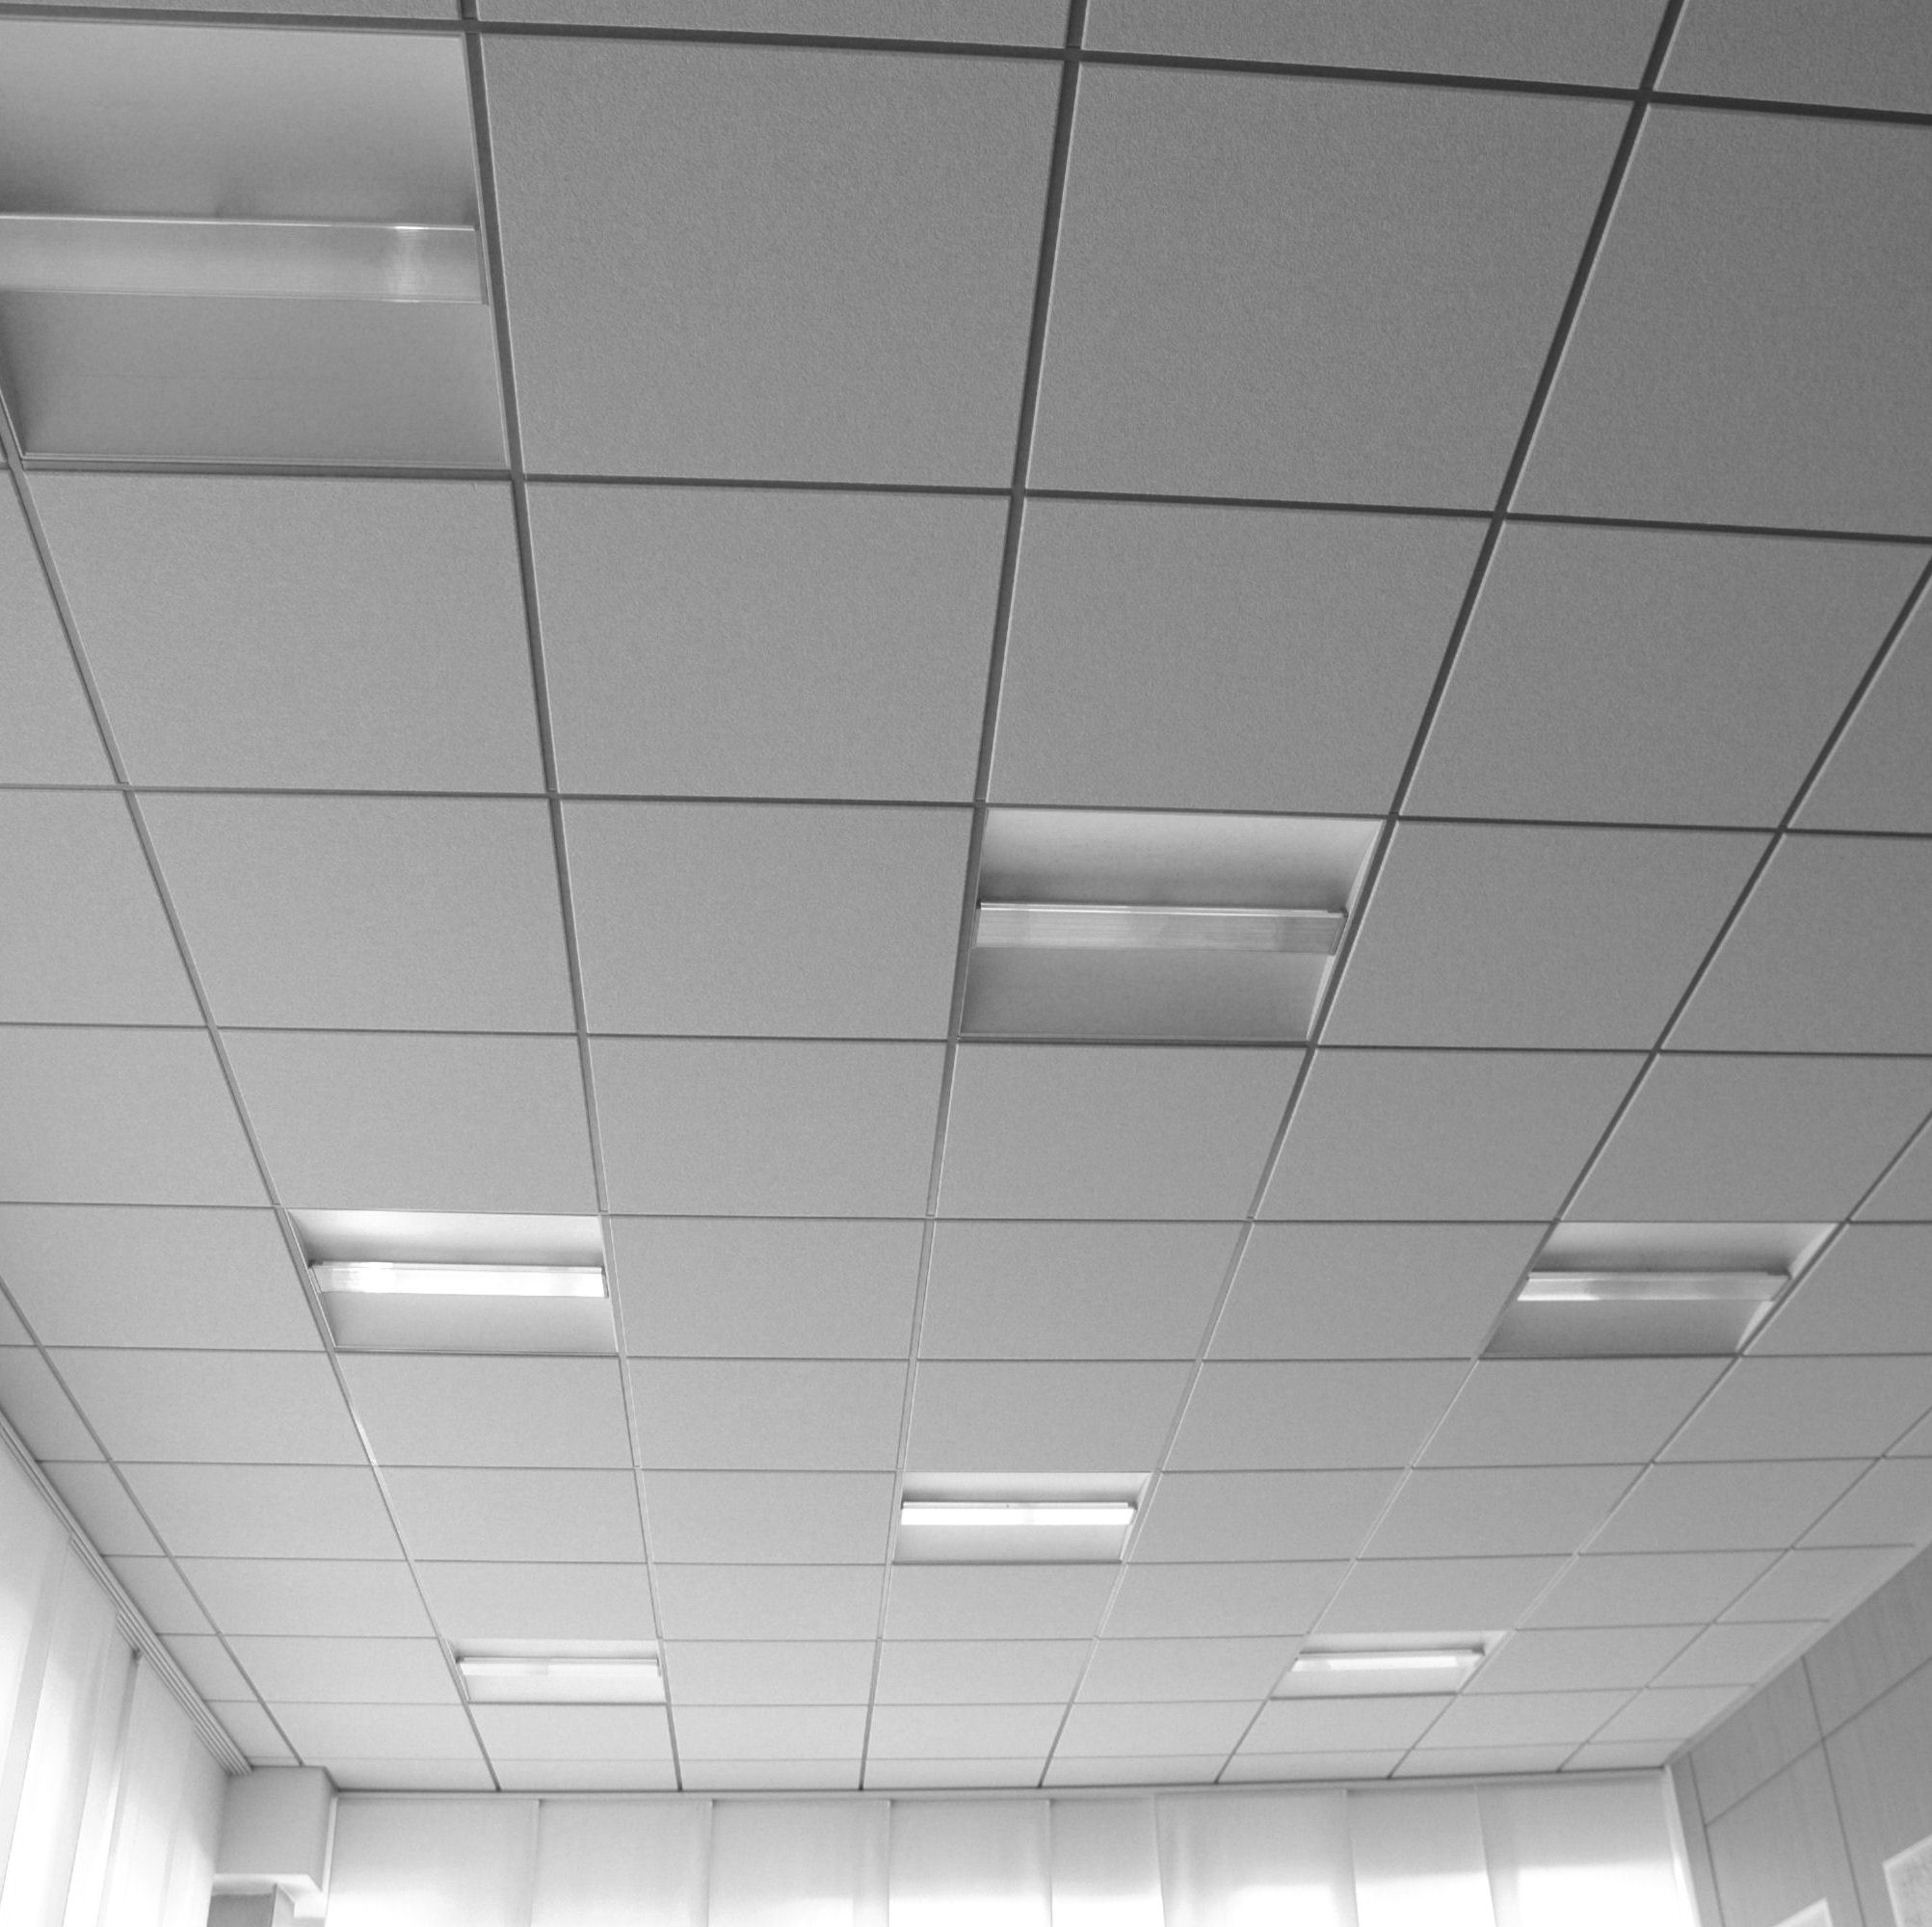 Types Of Ceiling Tile Grid Types Of Ceiling Tile Grid types of drop ceiling grid about ceiling tile 2005 X 2000